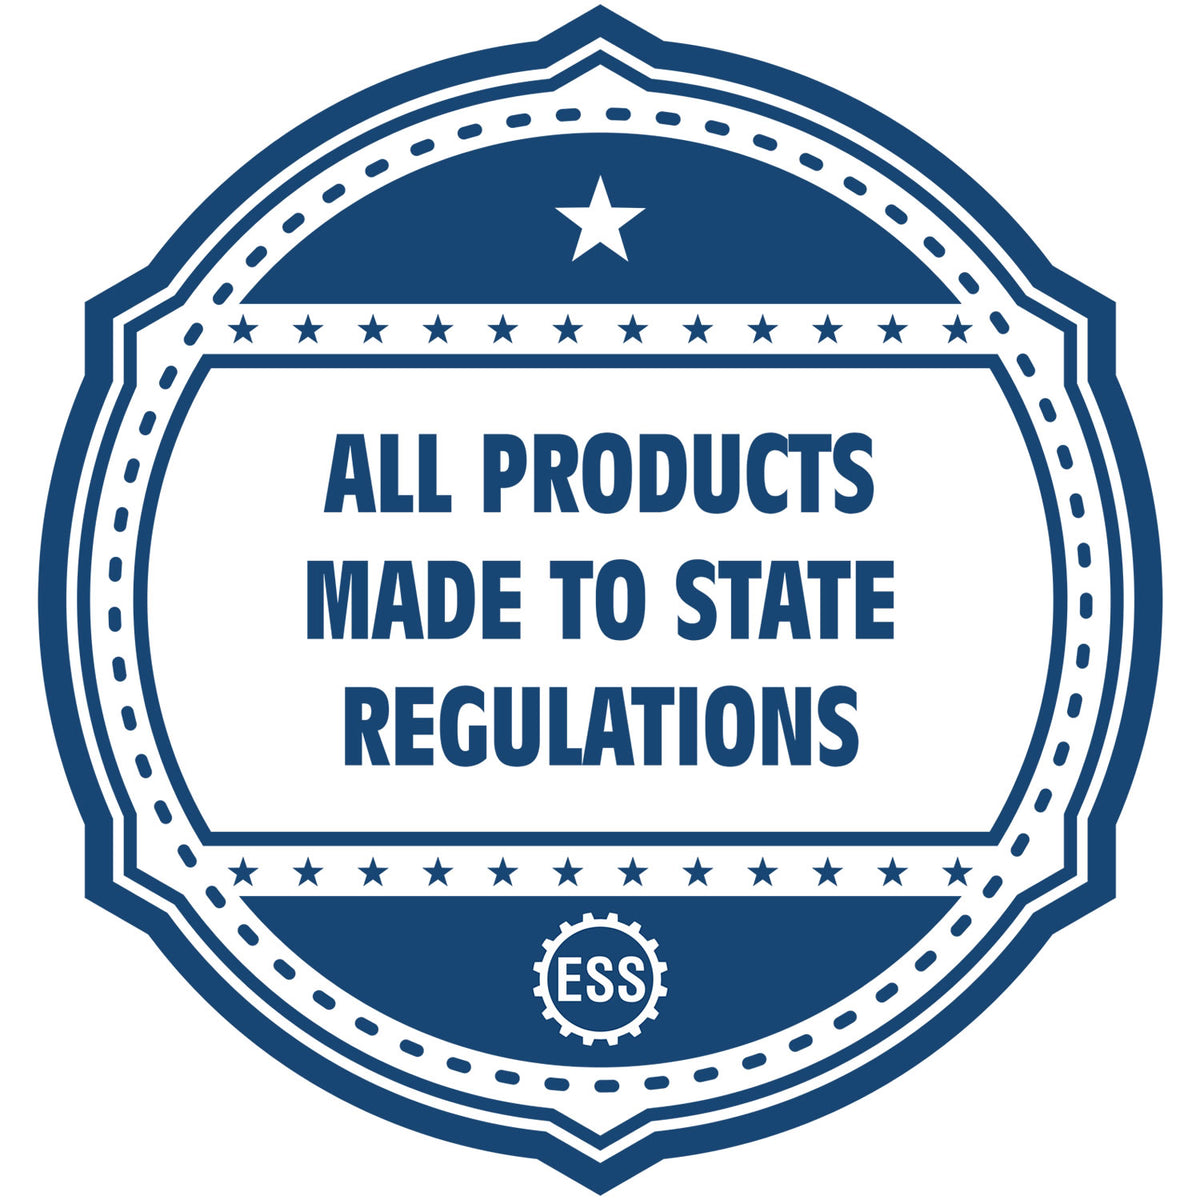 An icon or badge element for the PSI Missouri Notary Stamp showing that this product is made in compliance with state regulations.